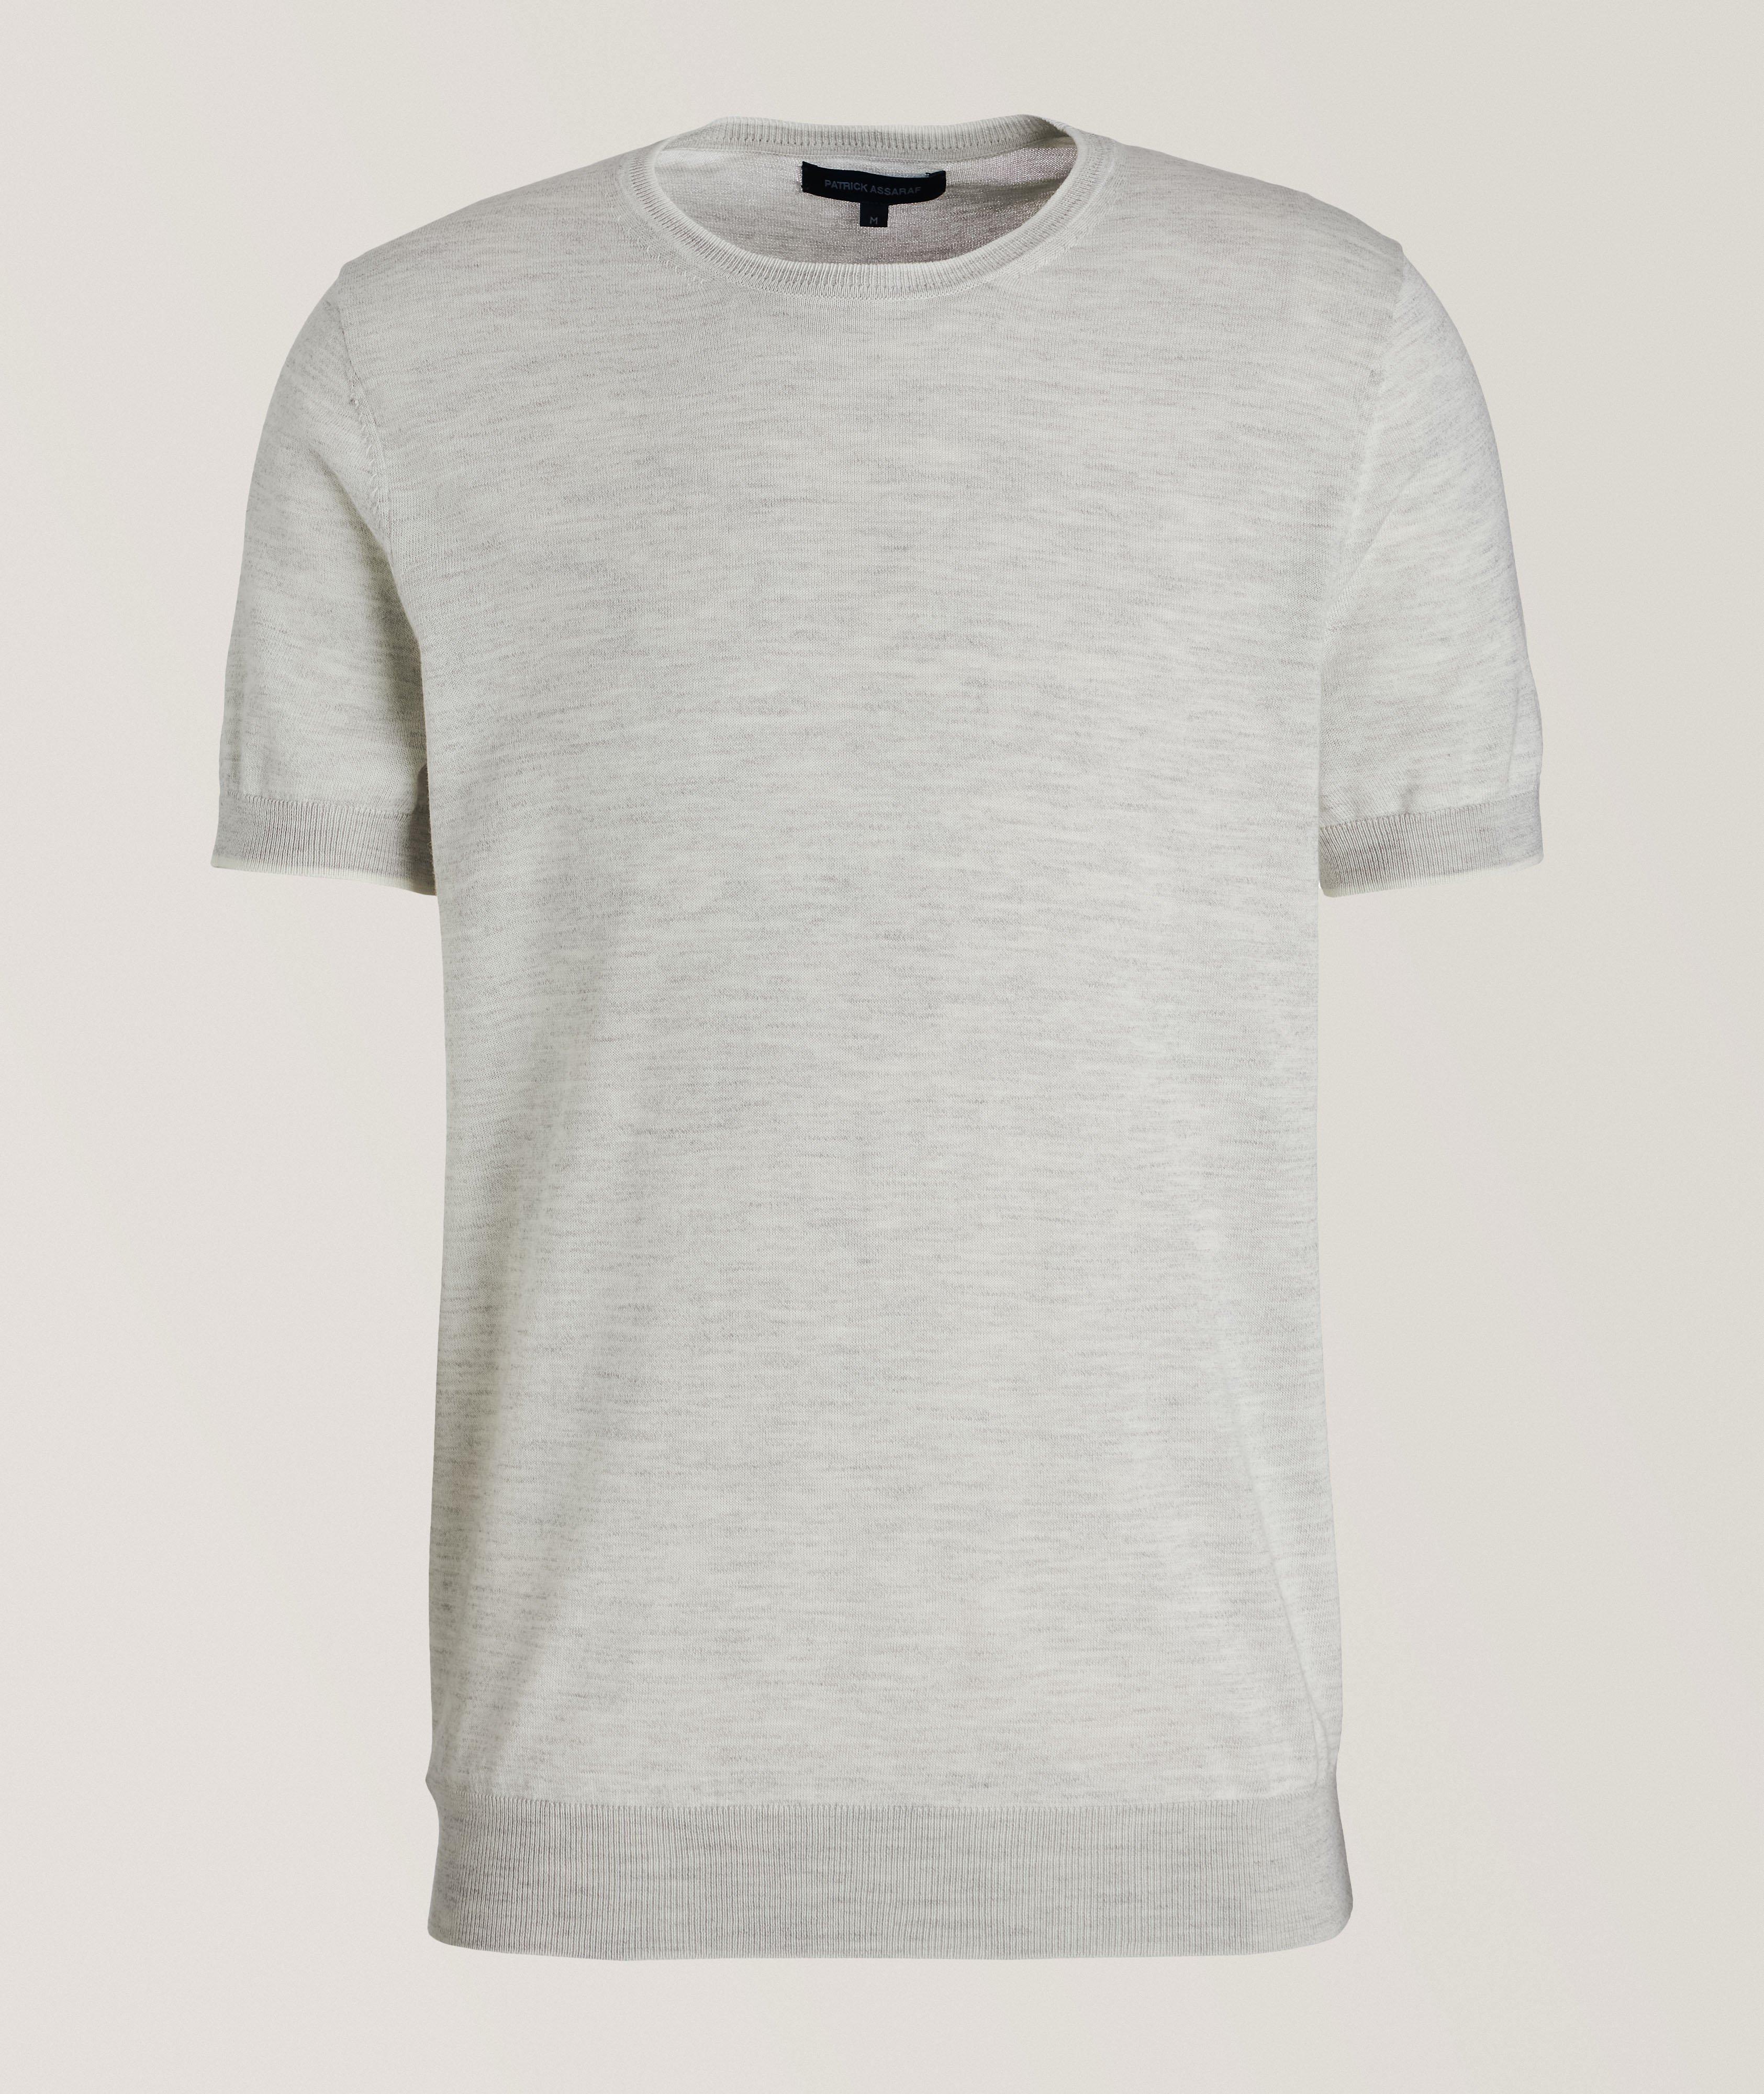 Contrast Tipped Cotton-Blend Knitted T-Shirt image 0